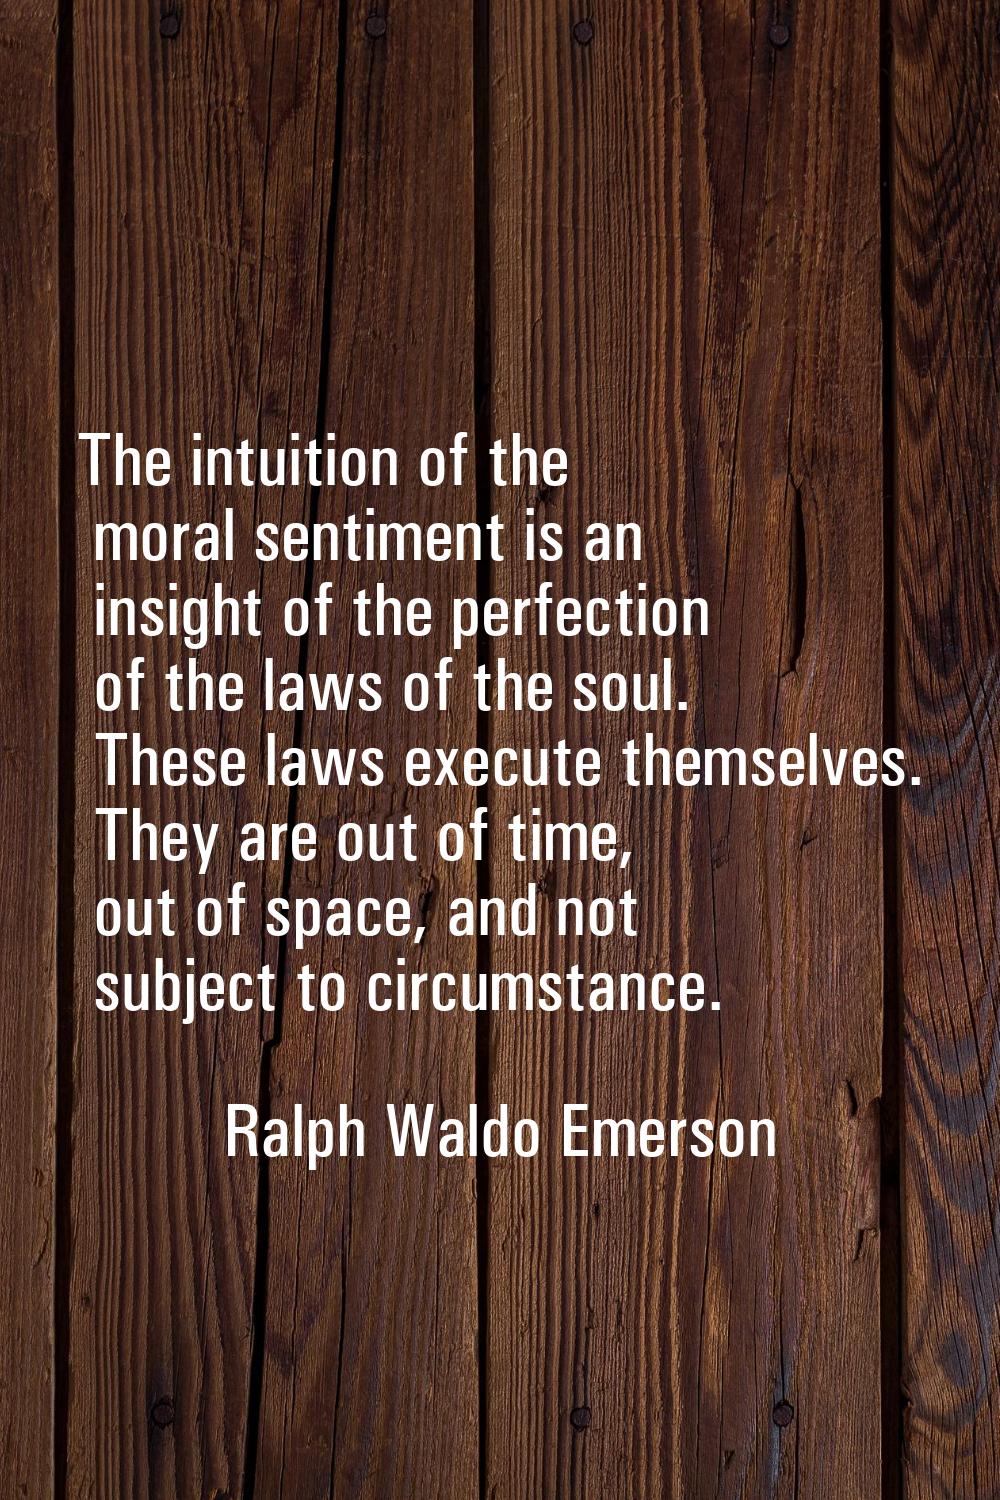 The intuition of the moral sentiment is an insight of the perfection of the laws of the soul. These